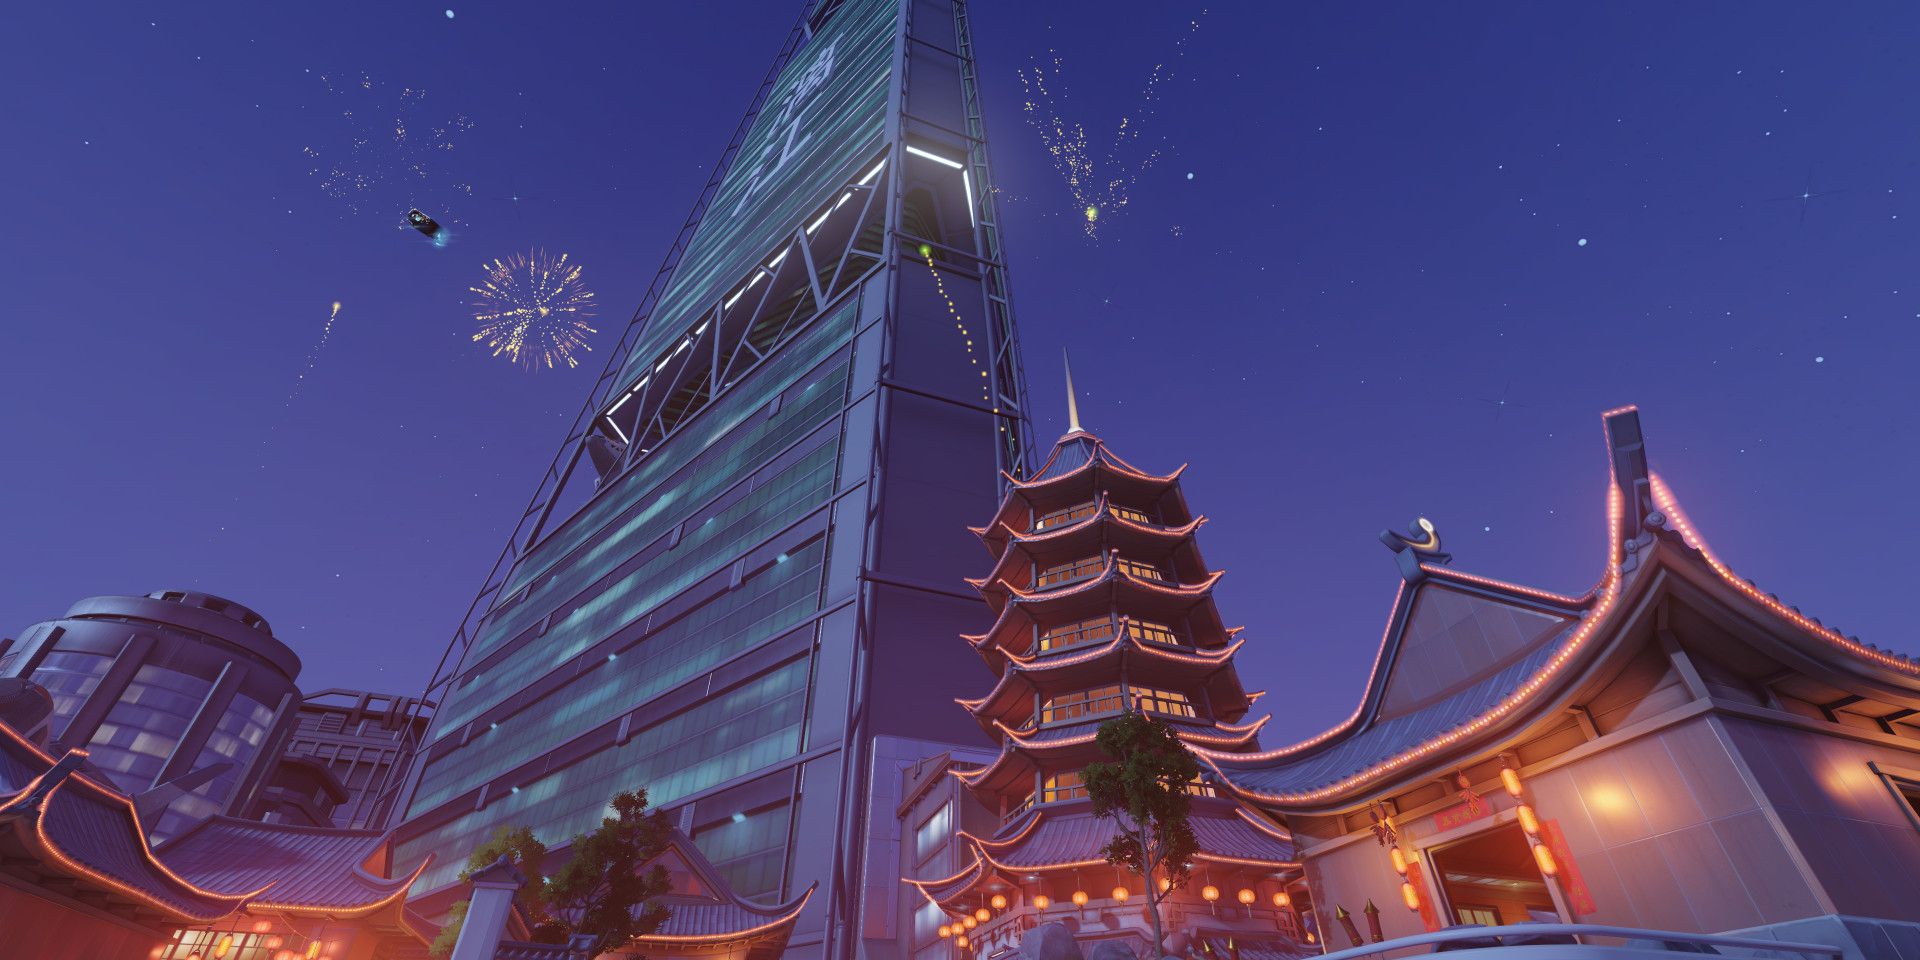 Lijiang Tower surrounded by New Year's fireworks in Overwatch